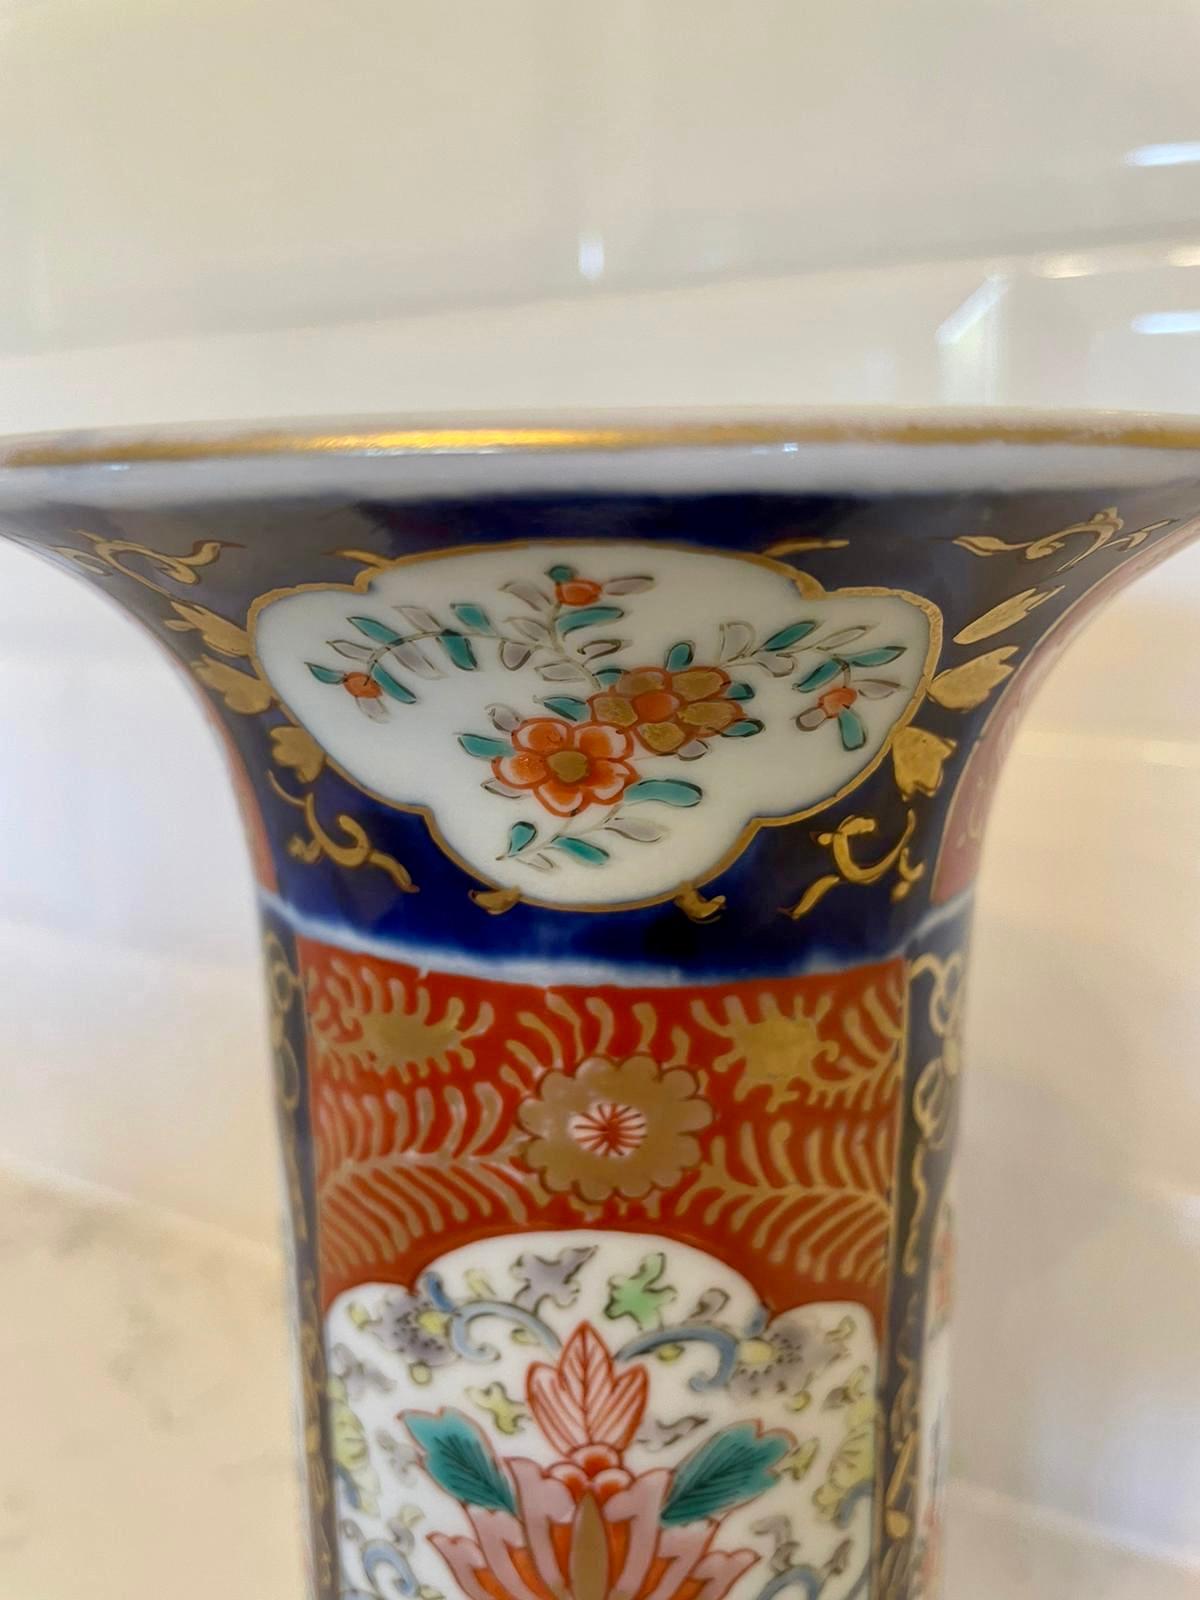 Quality antique Imari vase having quality hand painted panels with flowers, leaves and dogs and hand painted in fantastic red, blue, green, yellow and gold colours.

In lovely original condition.

Measures: H 26cm
W 12.5cm 
D 12.5cm 
Date